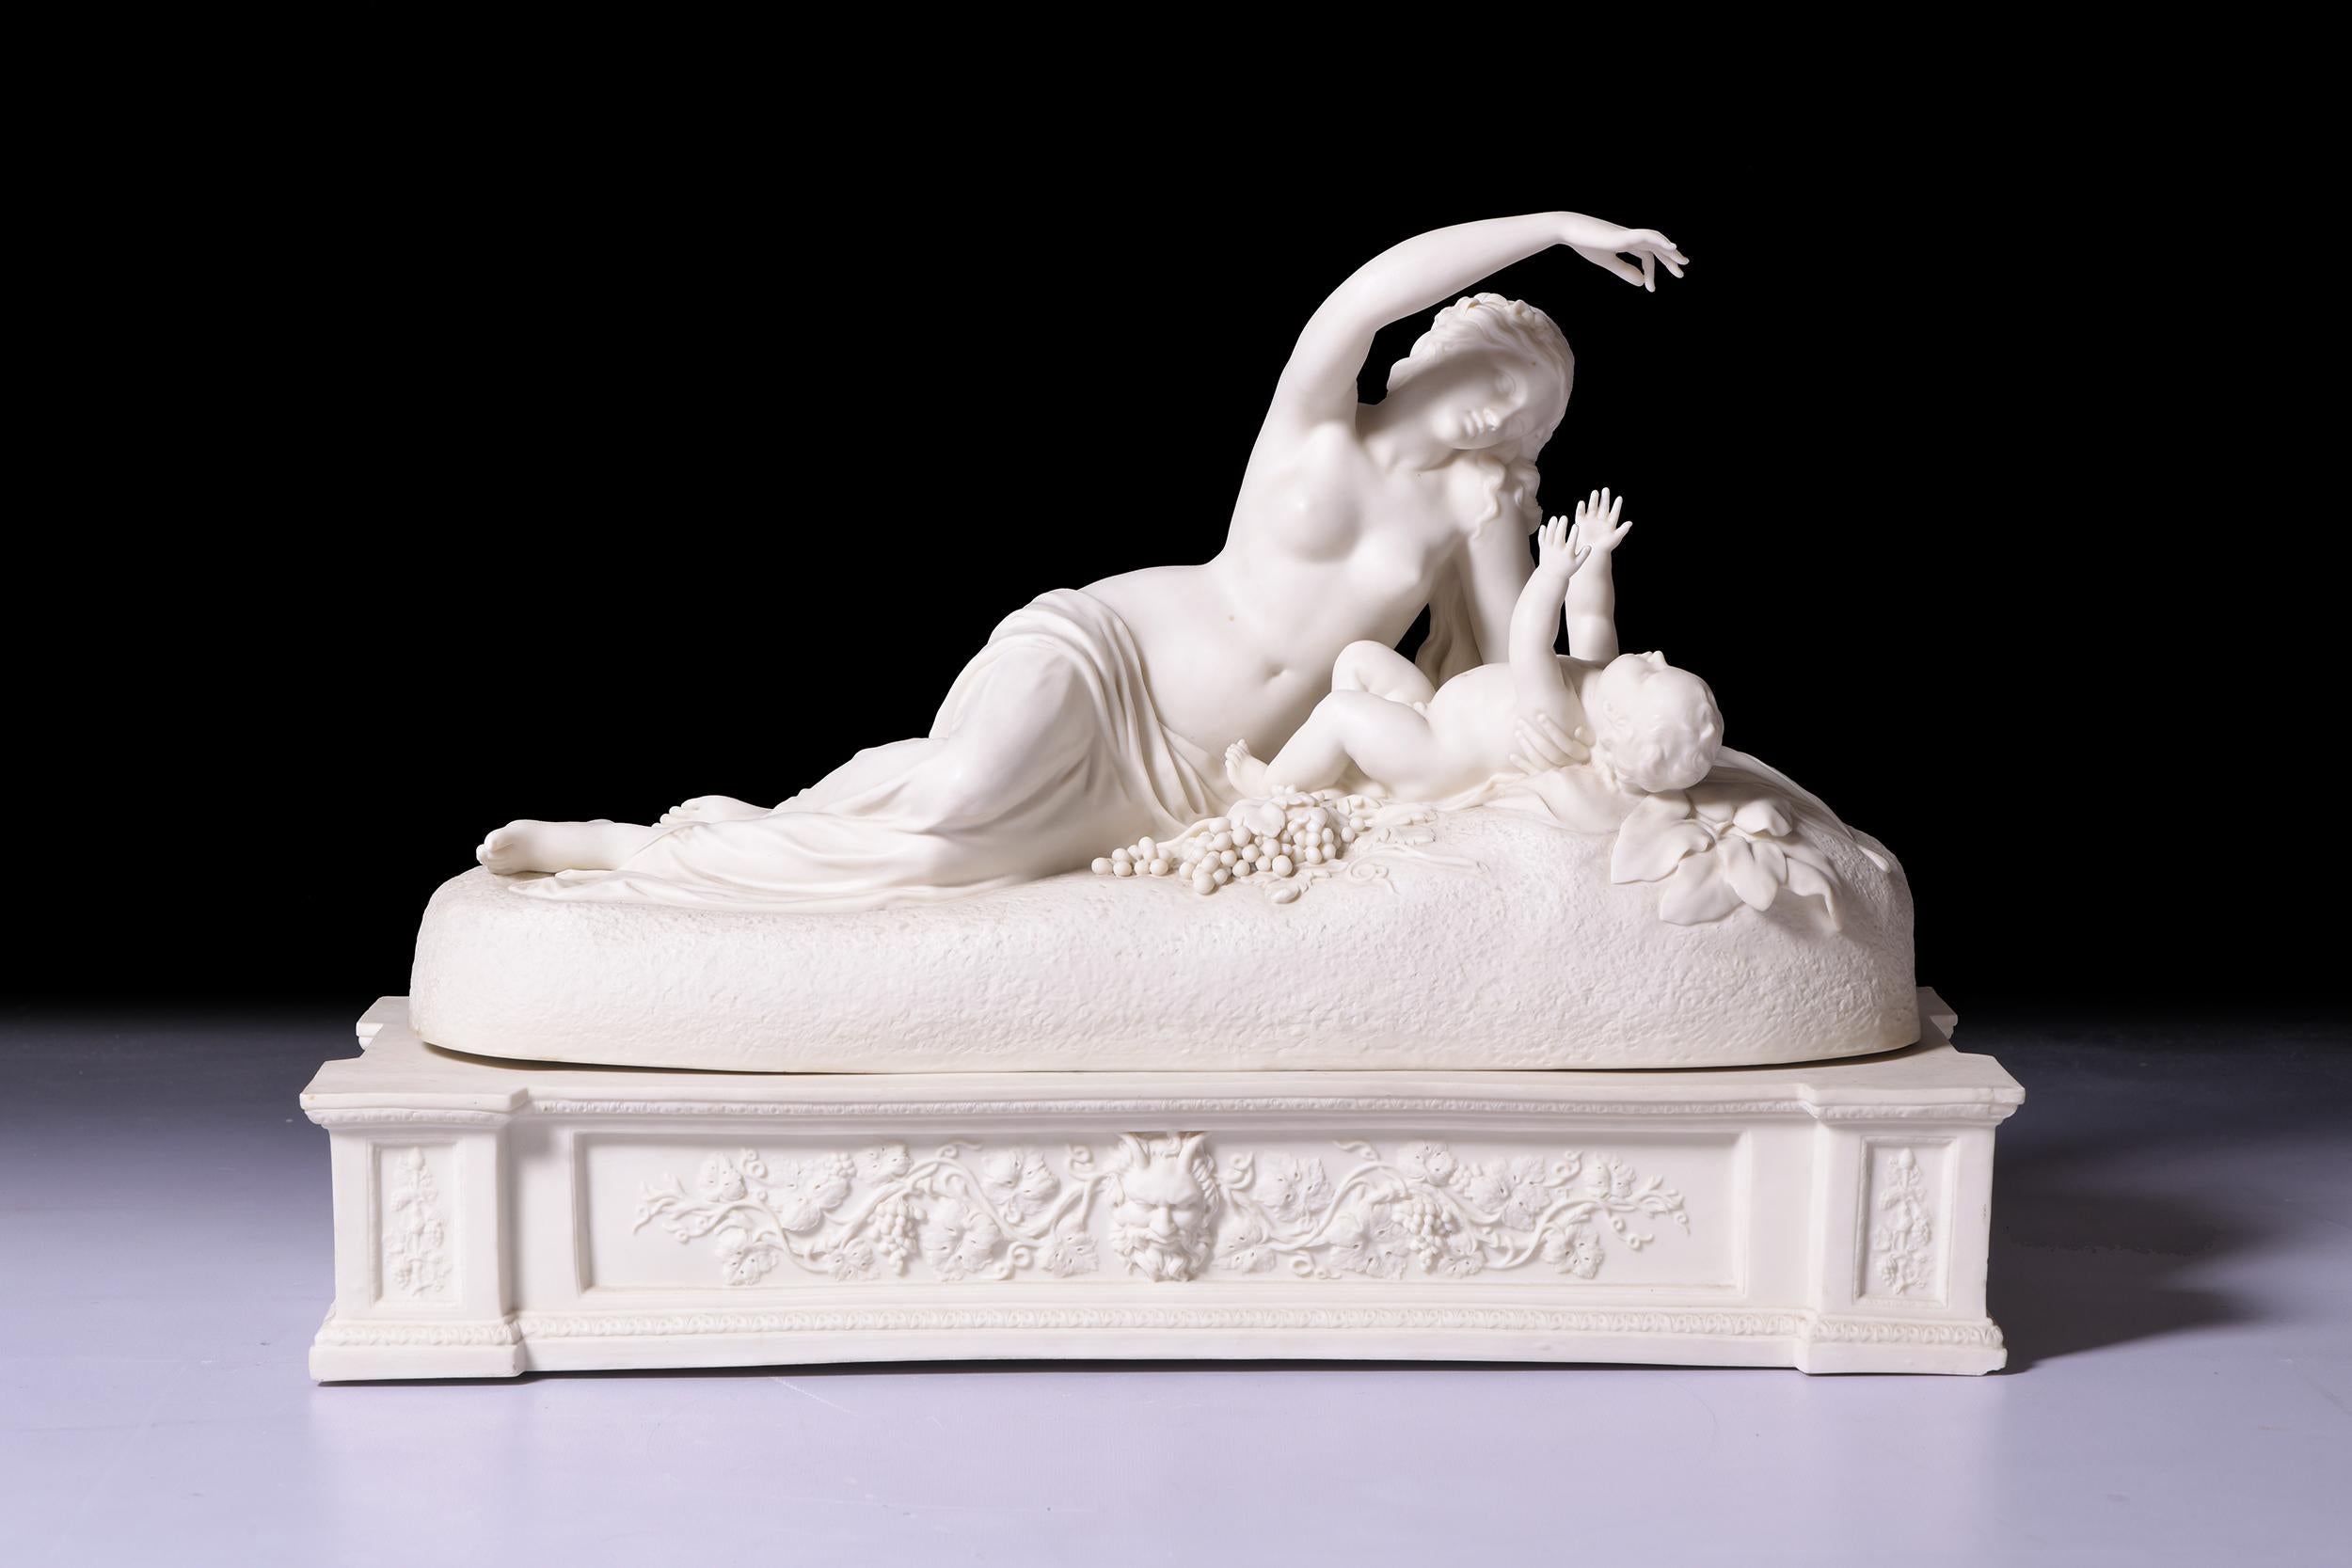 An exceptional 19th century Parian figure group of The Infant Bacchus and Ino of a recumbent naked girl playing with an infant by Irish Sculpture John Henry Foley. Note: Ino & Bacchus was Foley's entry for The Royal Academy in 1840 and confirmed his